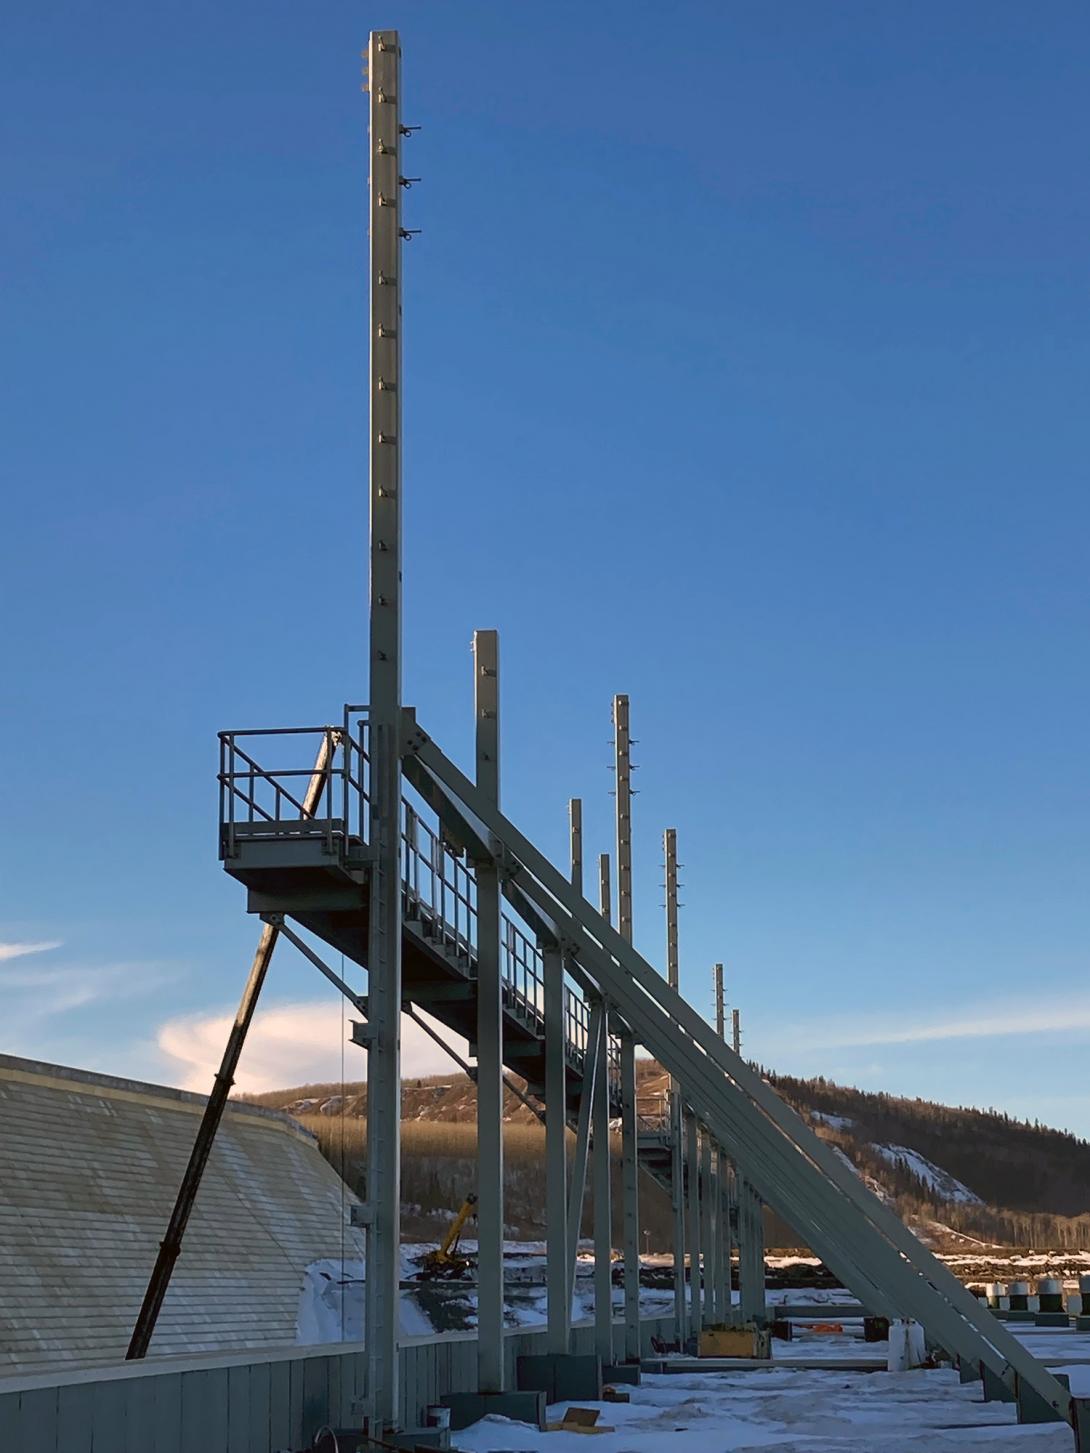 The transmission structure on top of the powerhouse will connect the transformers below to the transmission towers on top of the intake structure. Those towers will then feed electricity to the substation. | February 2023